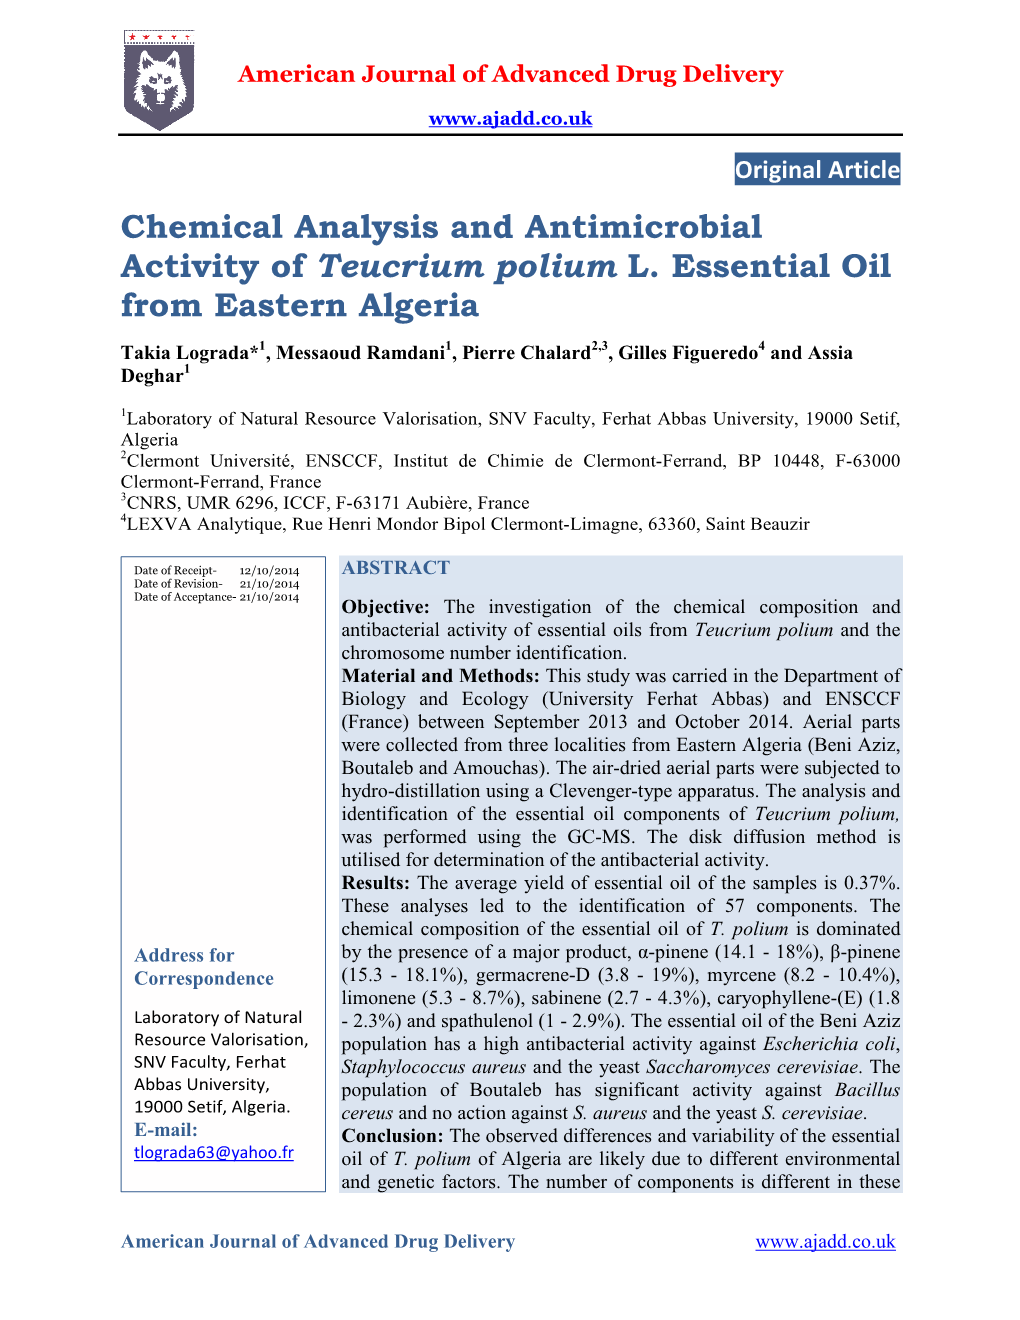 Chemical Analysis and Antimicrobial Activity of Teucrium Polium L